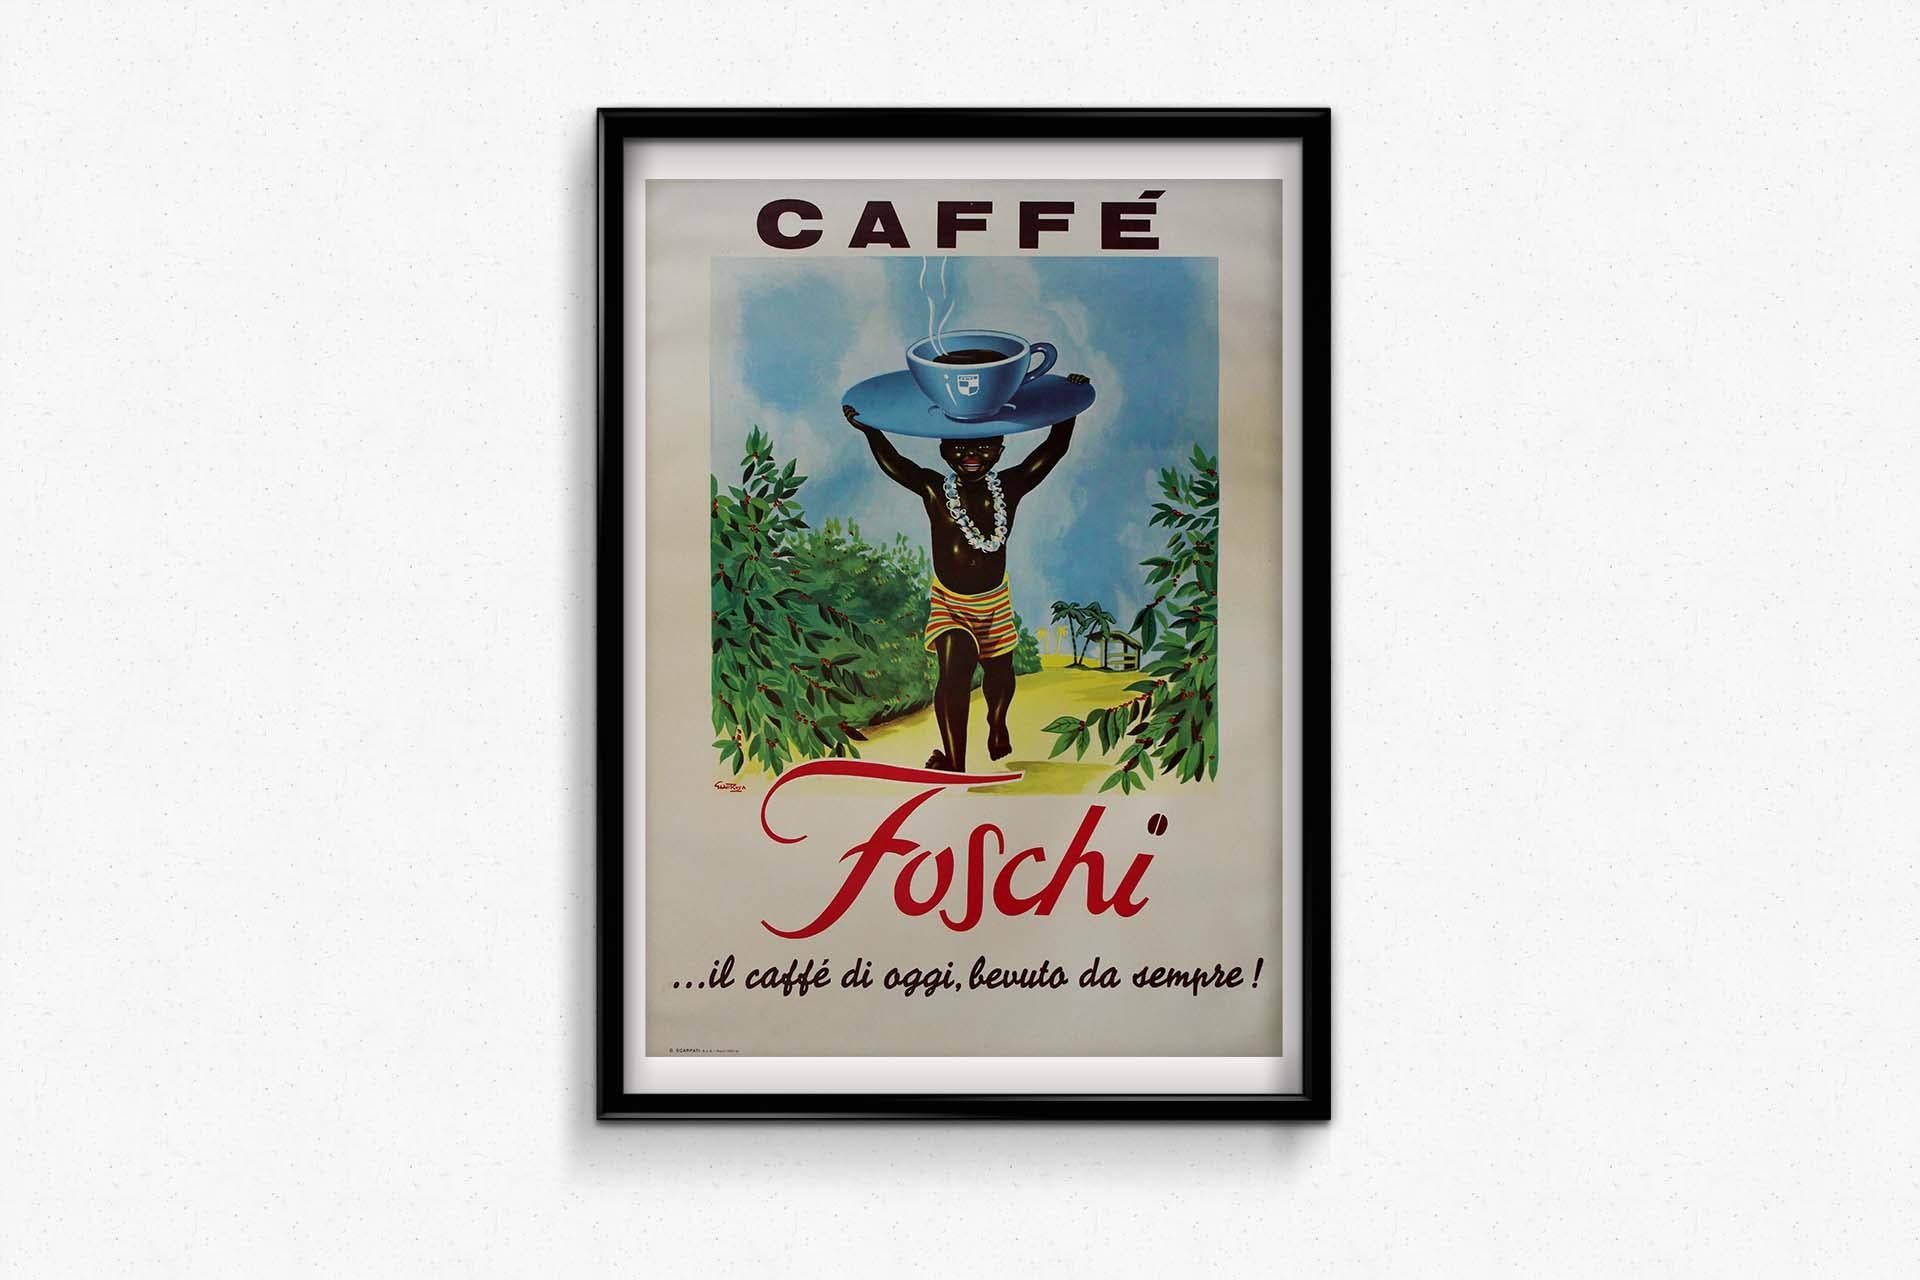 In 1960, artist Gian Rusa poured his vibrant creativity into an advertising poster for Caffé Foschi, giving life to the tagline, 